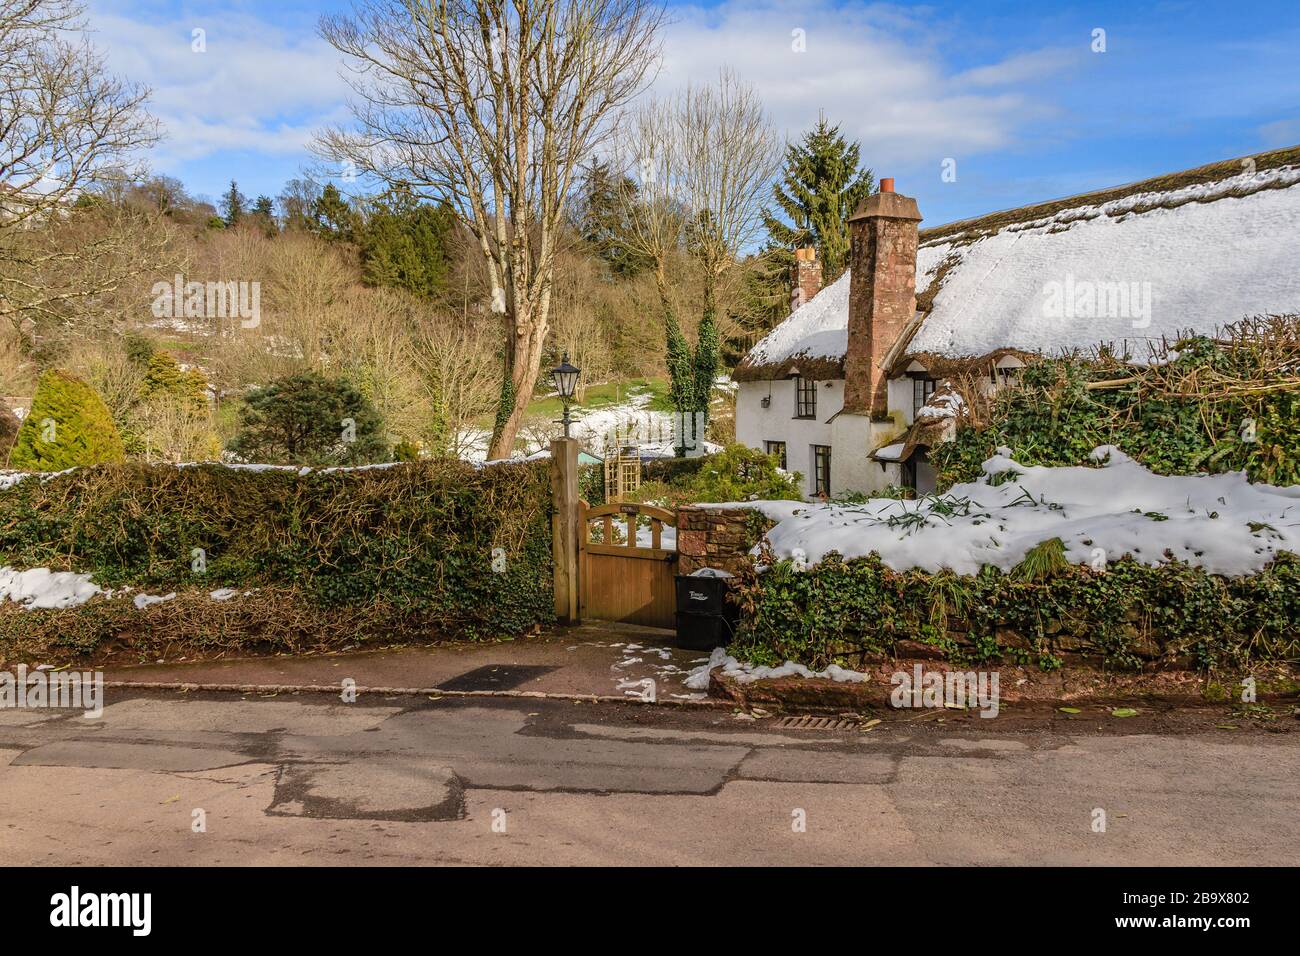 Snow on the roof of a thatched cottage in the historical village of Cockington, Torquay, Devon, UK. March 2018. Stock Photo